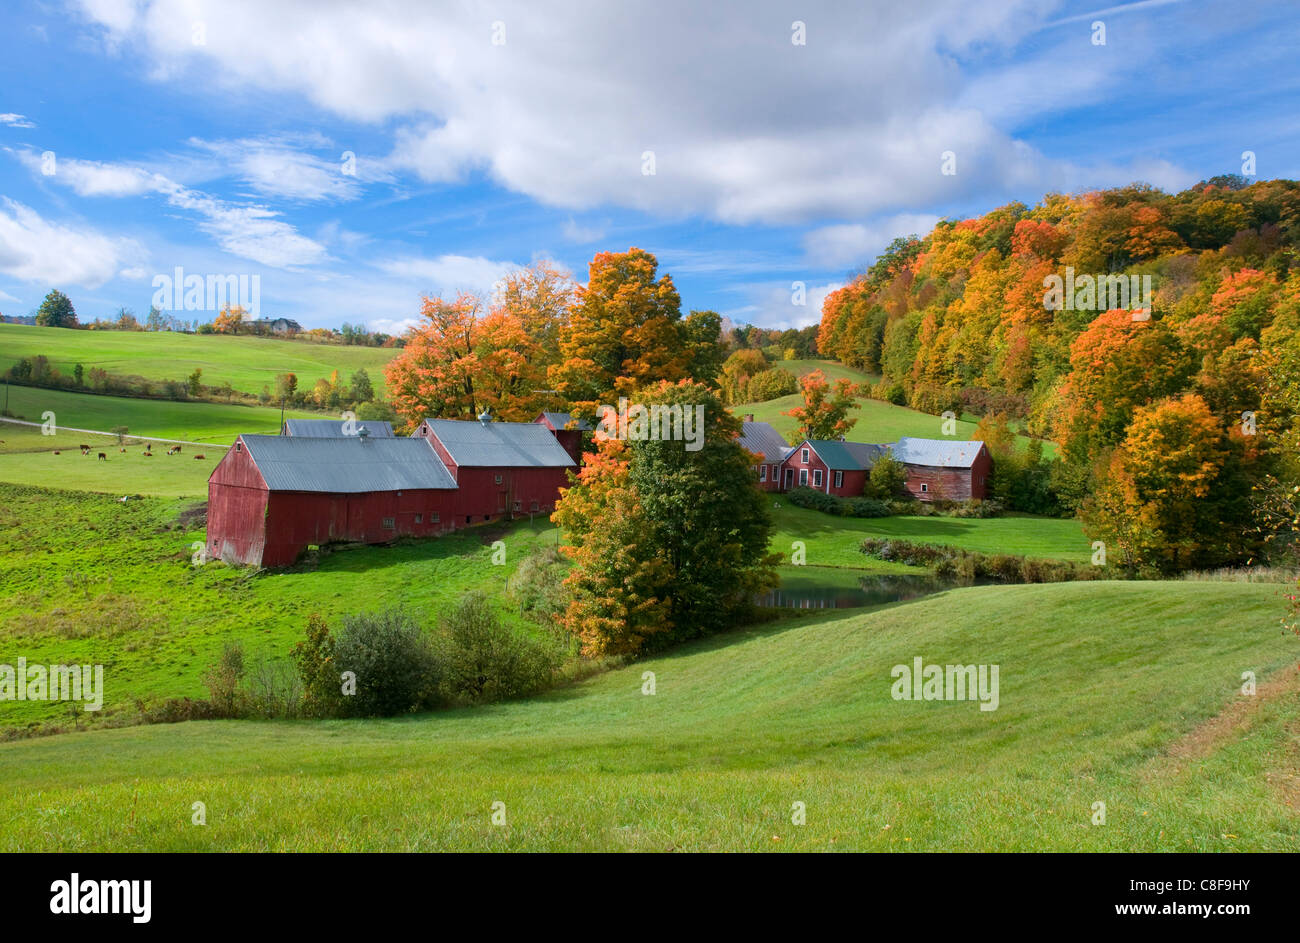 Autumn foliage surrounding red barns at Jenne Farm in South Woodstock, Vermont, New England, United States of America Stock Photo